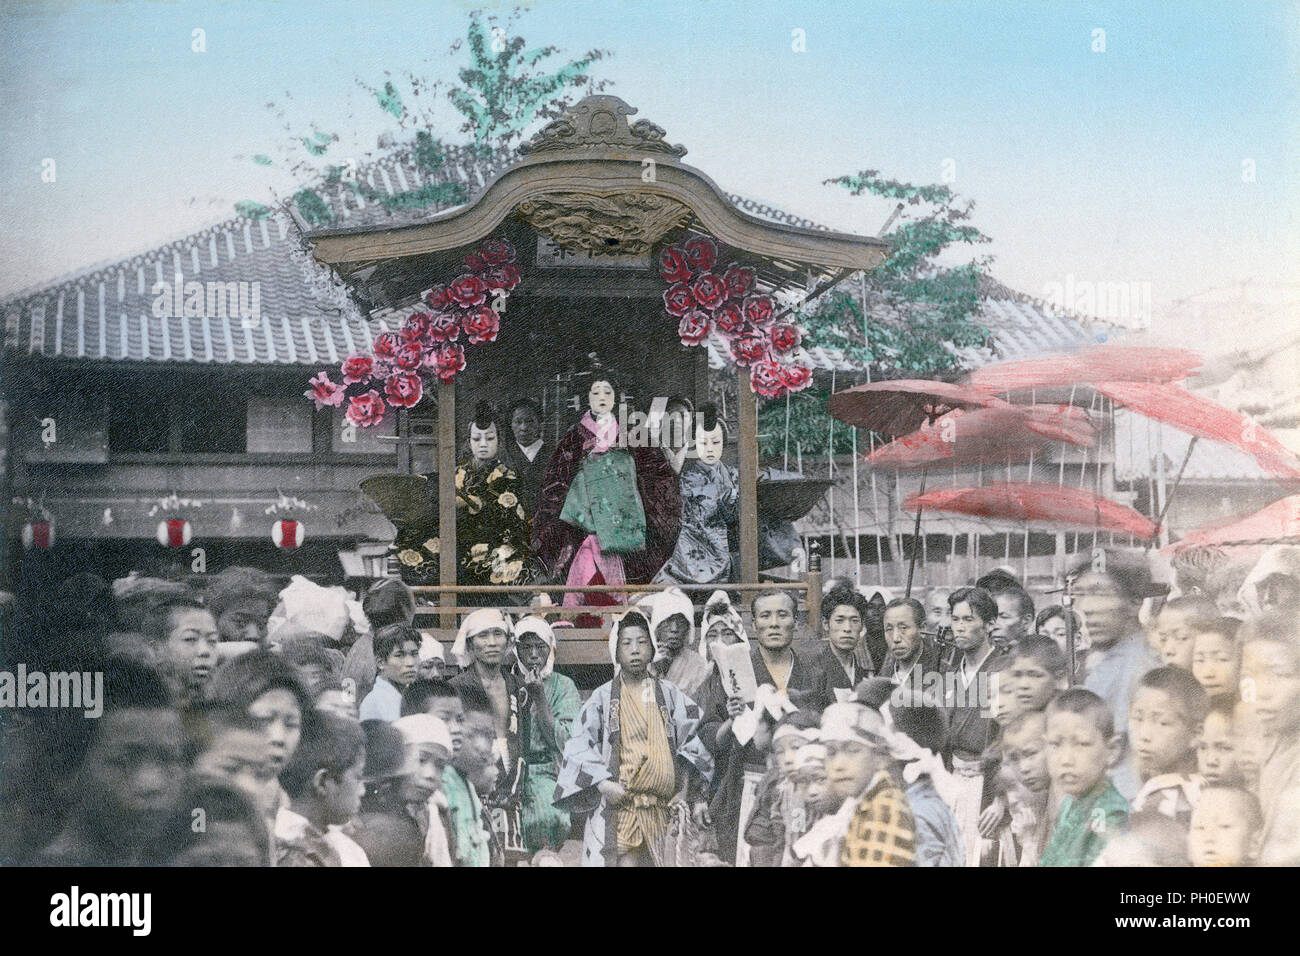 [ 1890s Japan - Float at a Religious Festival ] —   A crowd stands in front of what appears to be a danjiri (float) during a matsuri (religious festival). Three costumed performers can be seen on the stage.  19th century vintage albumen photograph. Stock Photo